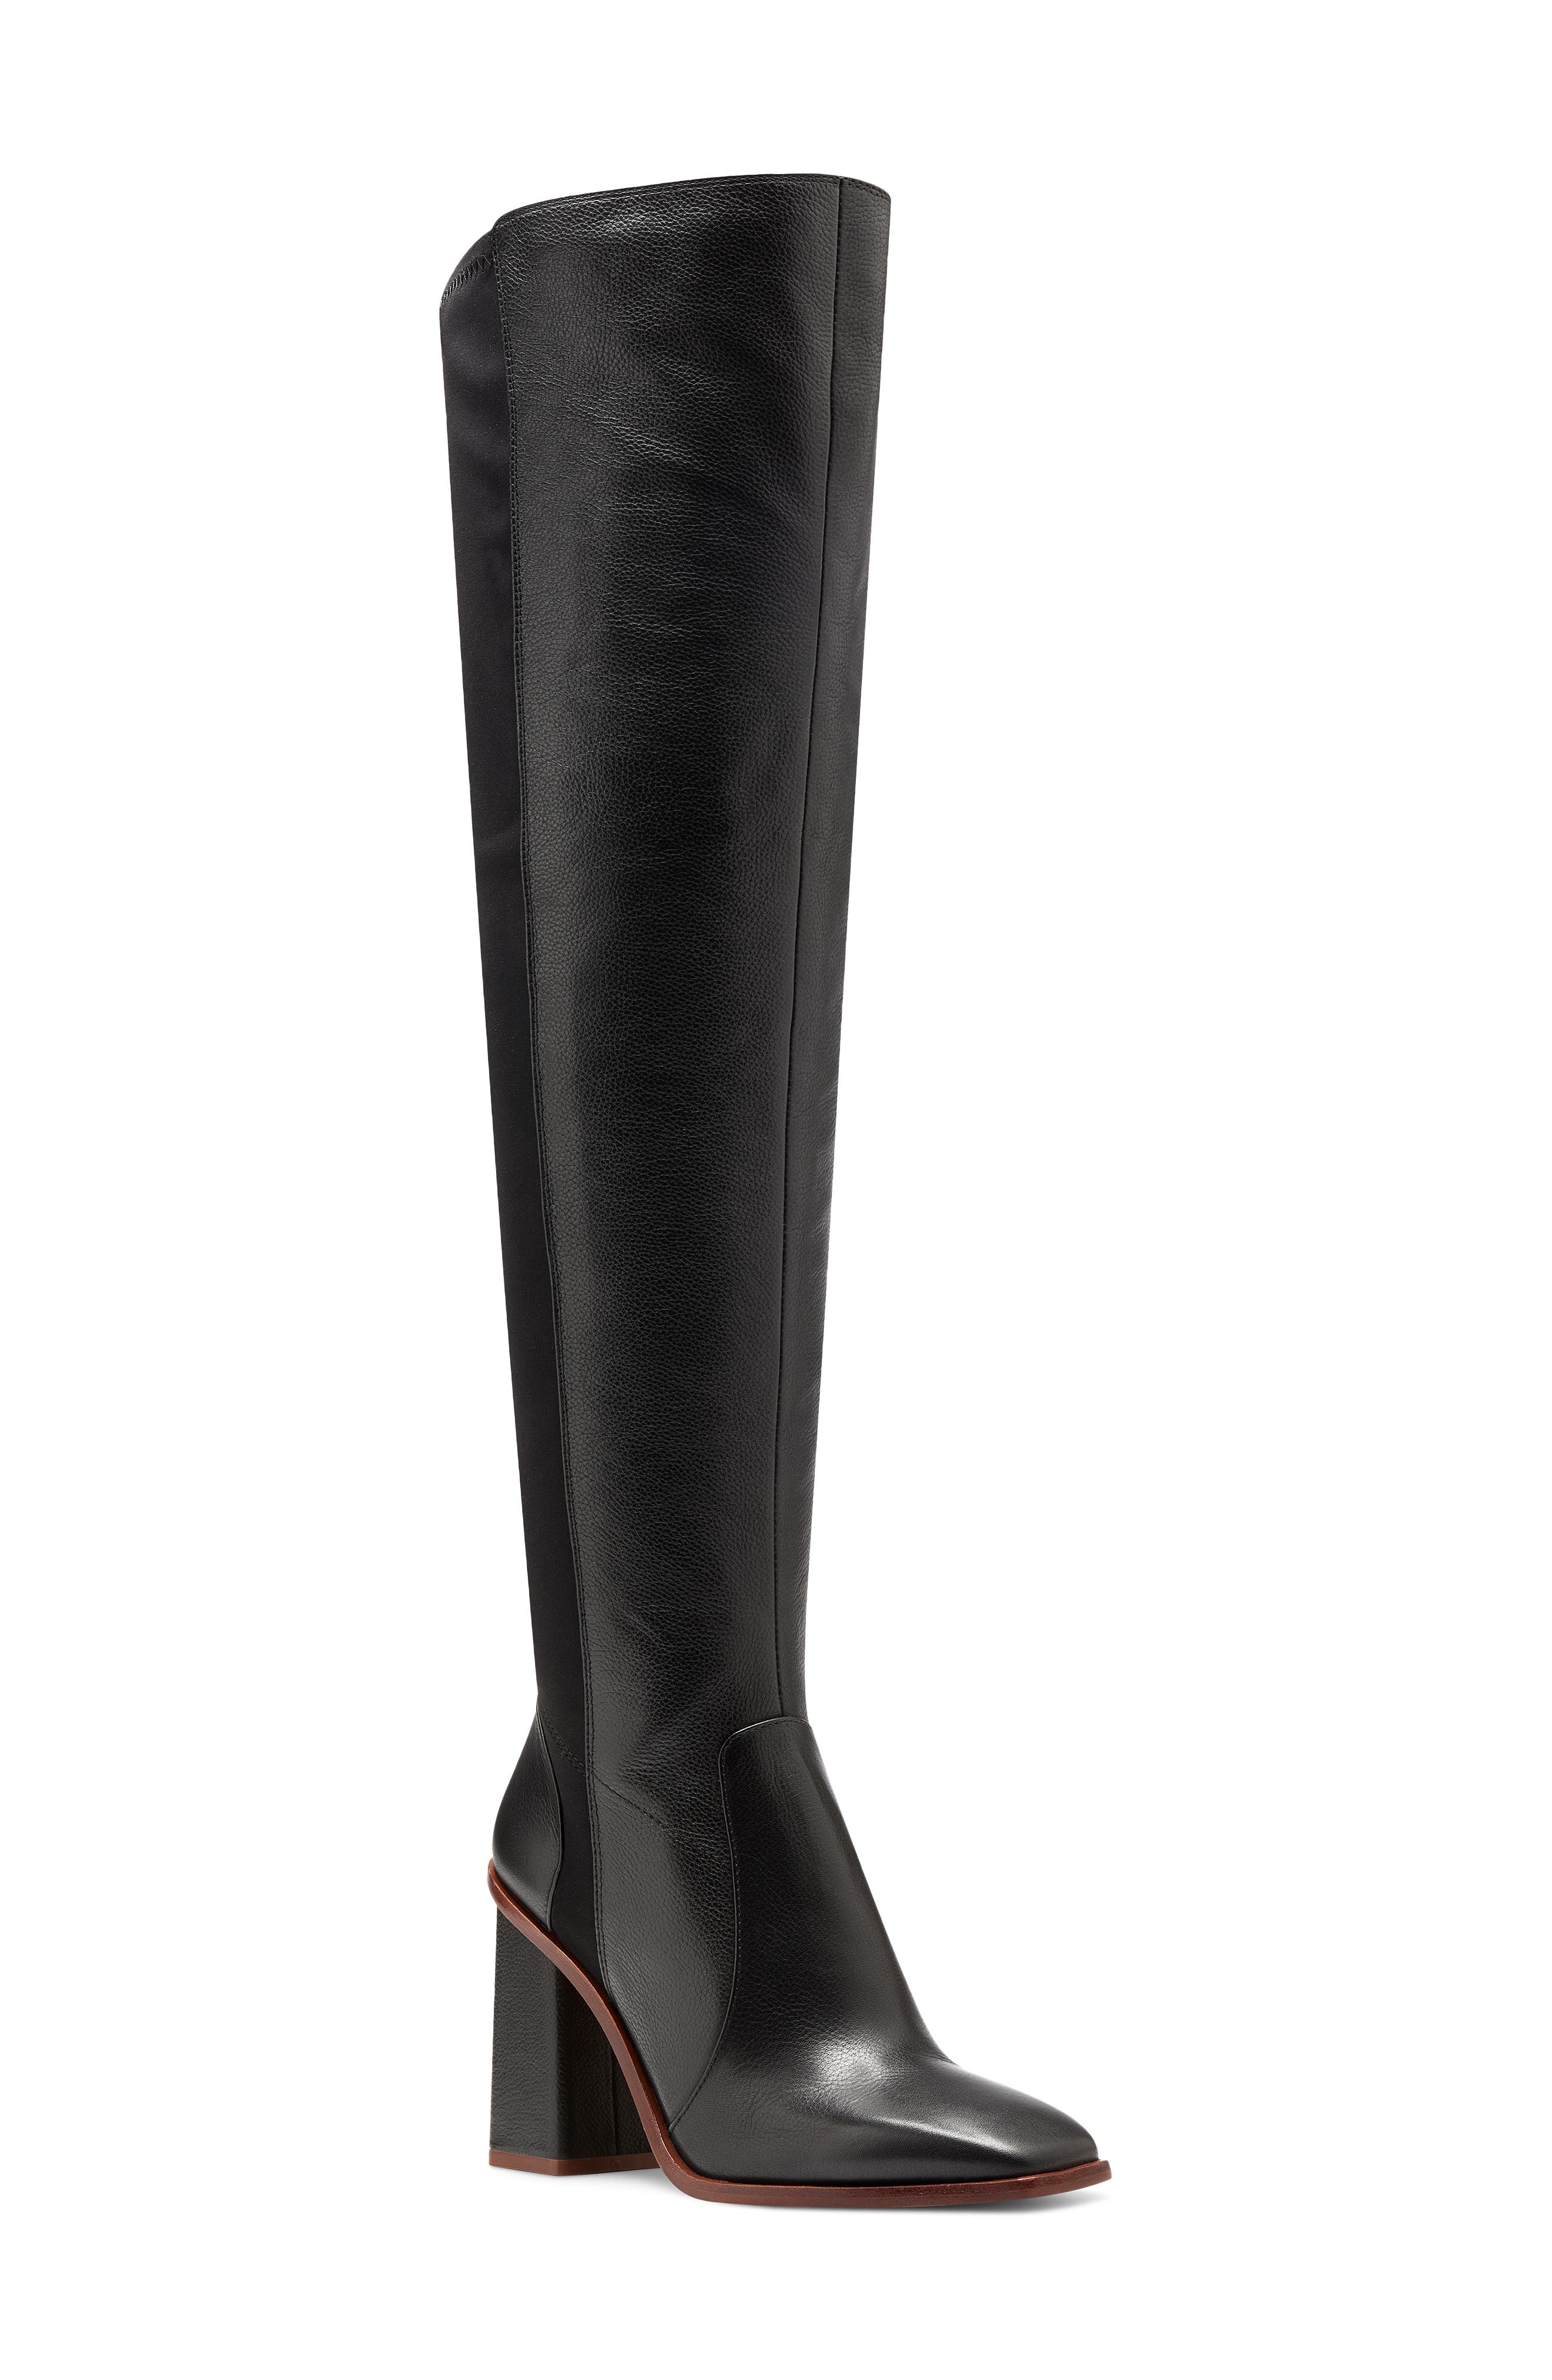 UPC 194307349532 product image for Women's Vince Camuto Dreven Over The Knee Boot, Size 6 M - Black | upcitemdb.com